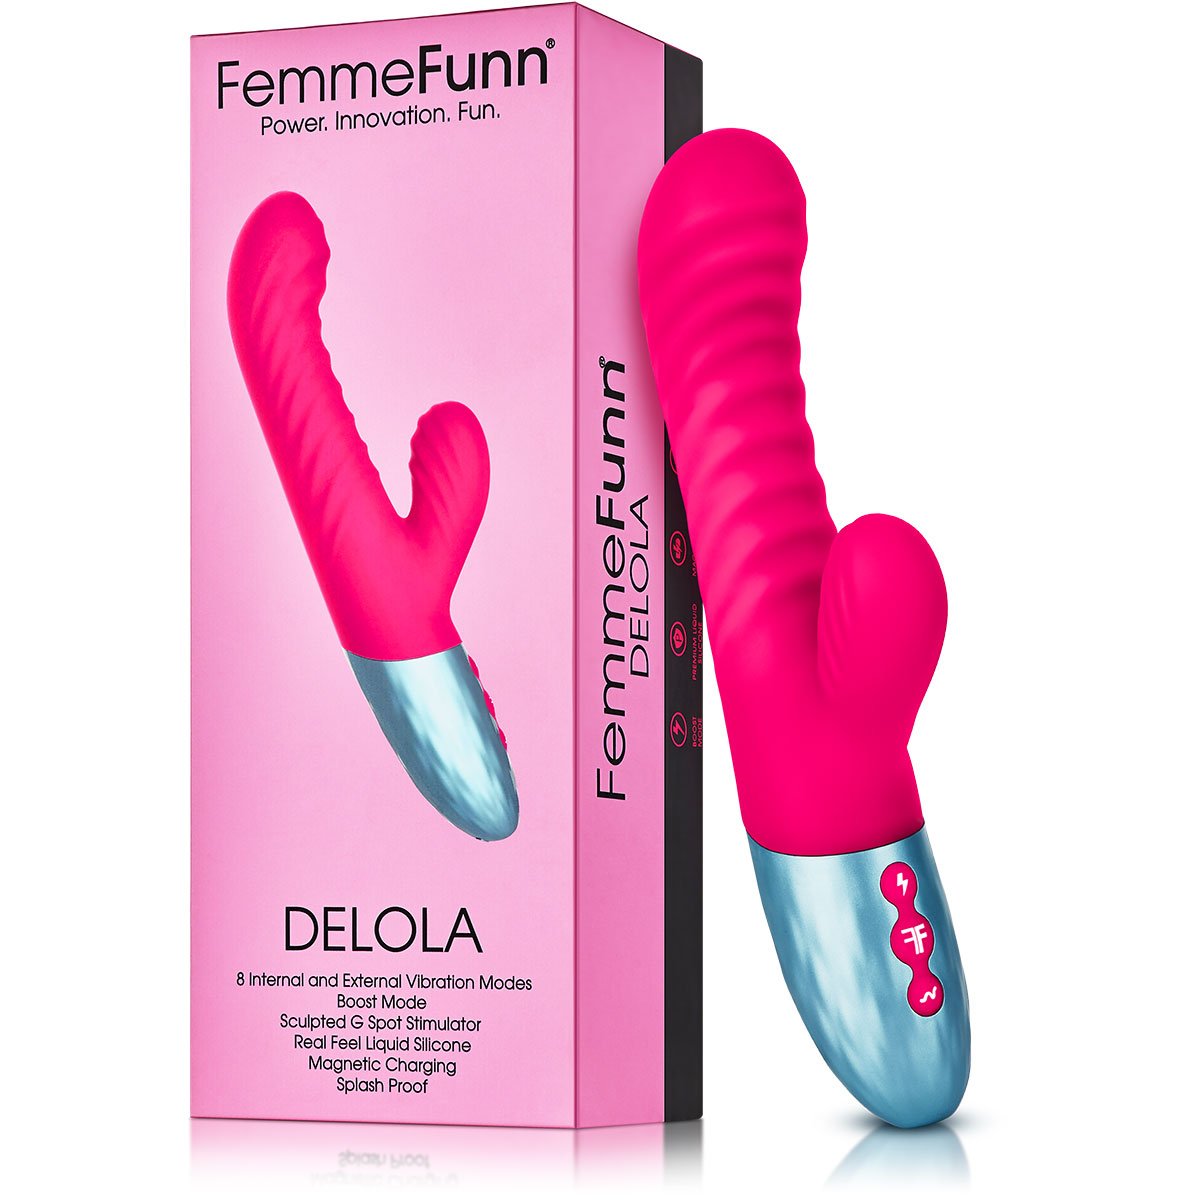 Femme Funn DELOLA - Buy At Luxury Toy X - Free 3-Day Shipping